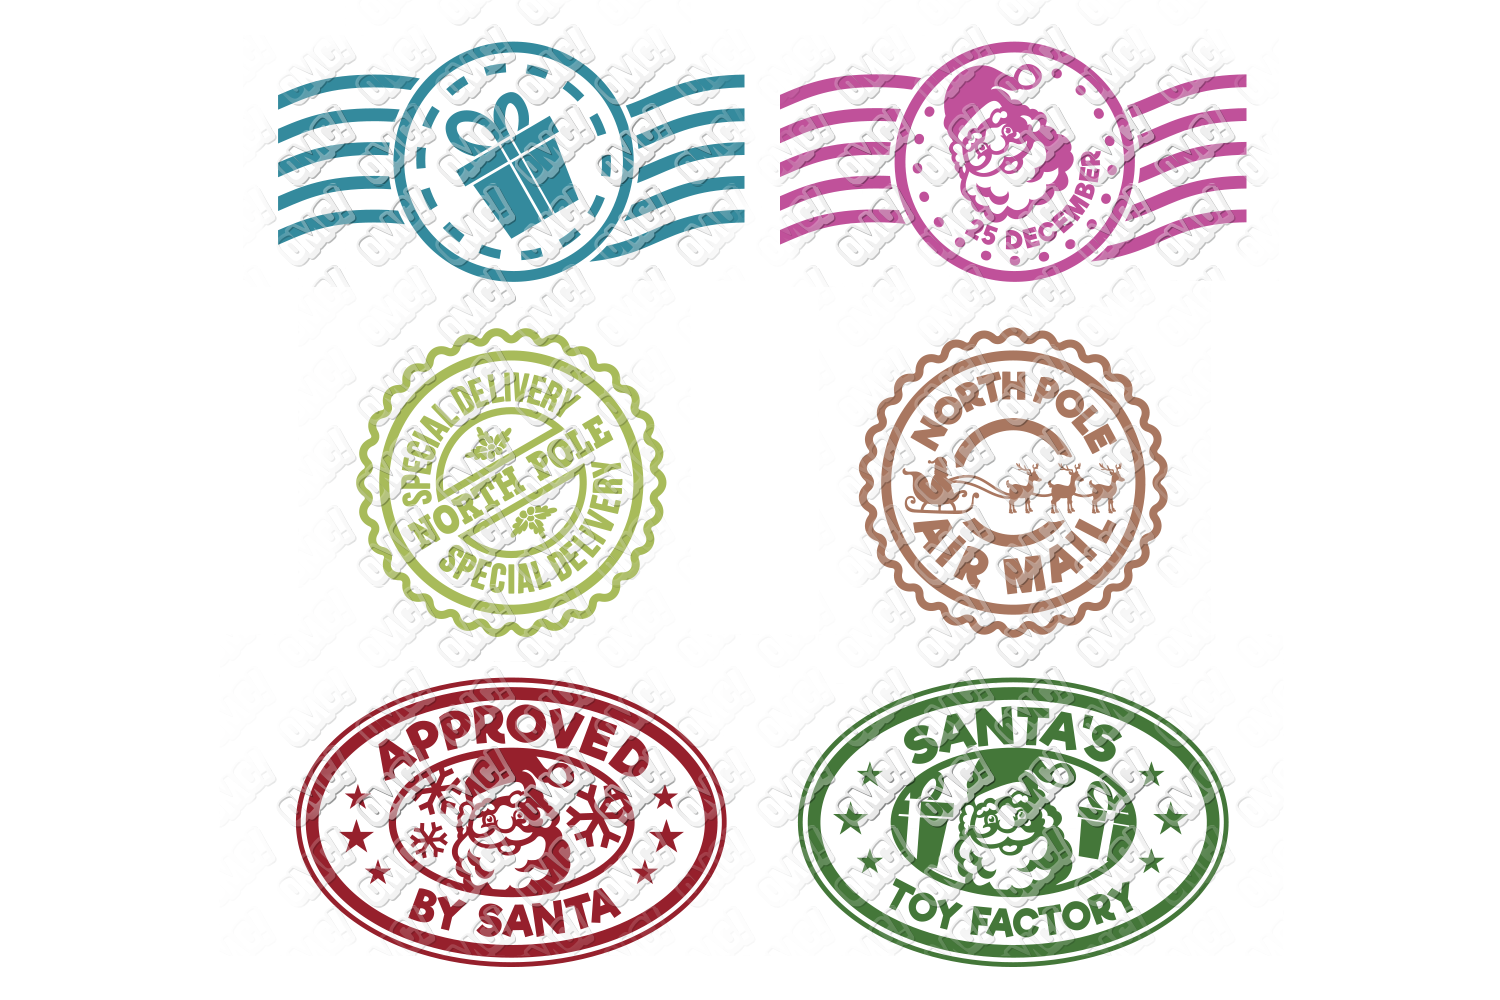 Christmas Stamps SVG Postage Seal in SVG, DXF, PNG, EPS, JPG